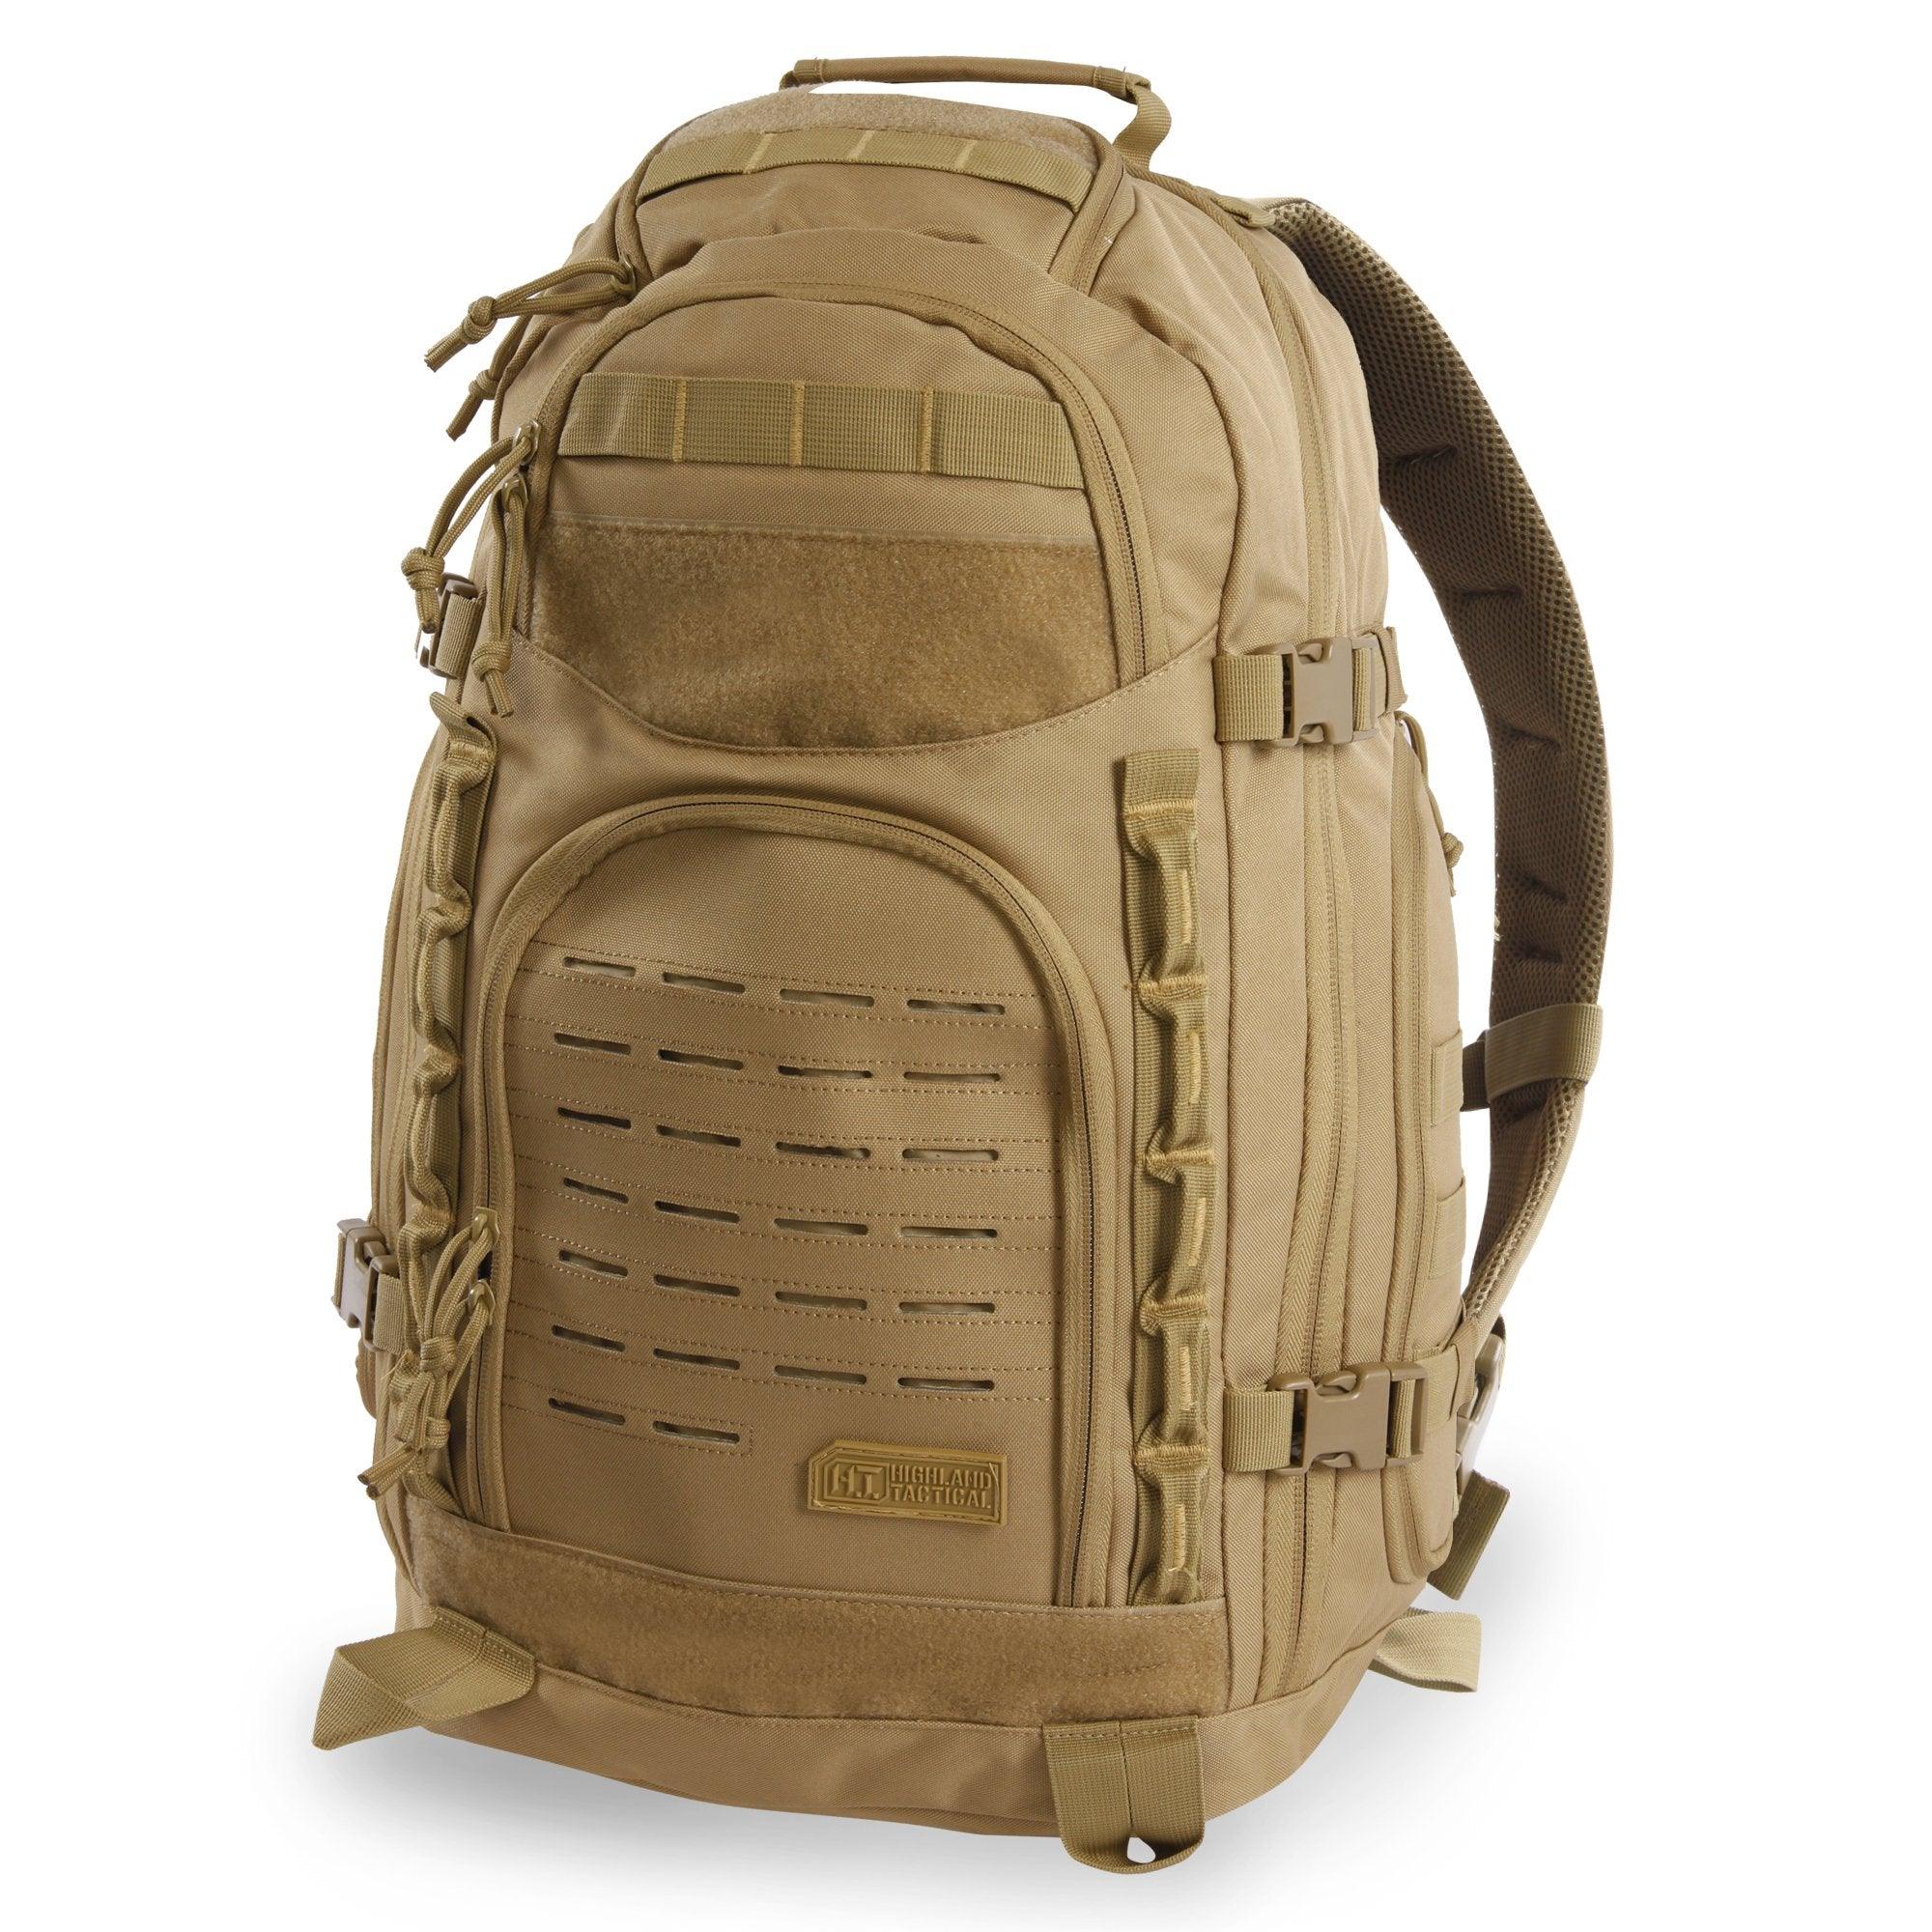 Foxtrot Tactical Backpack, MOLLE Backpack, Military Backpacks